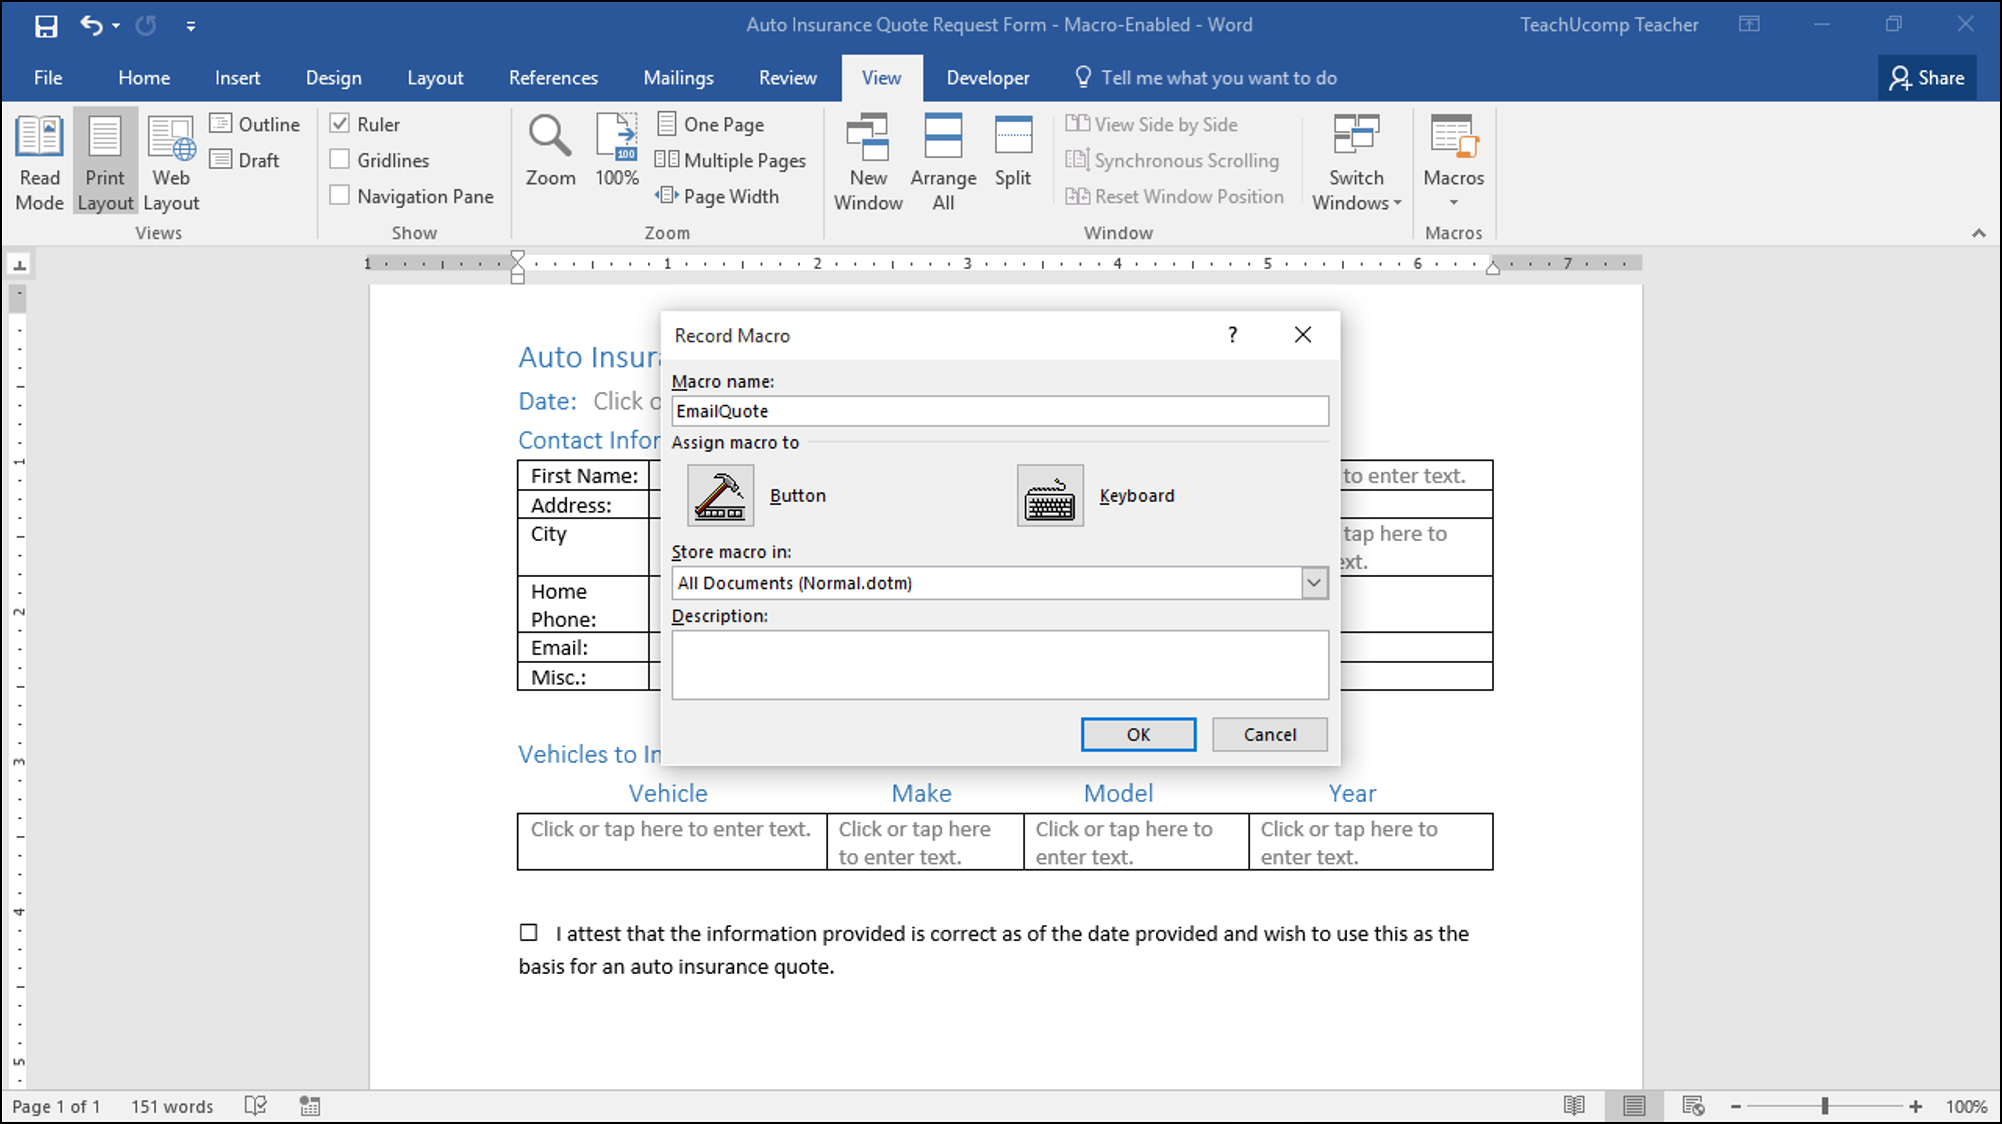 Record A Macro In Word - Instructions And Video Lesson For Word Macro Enabled Template